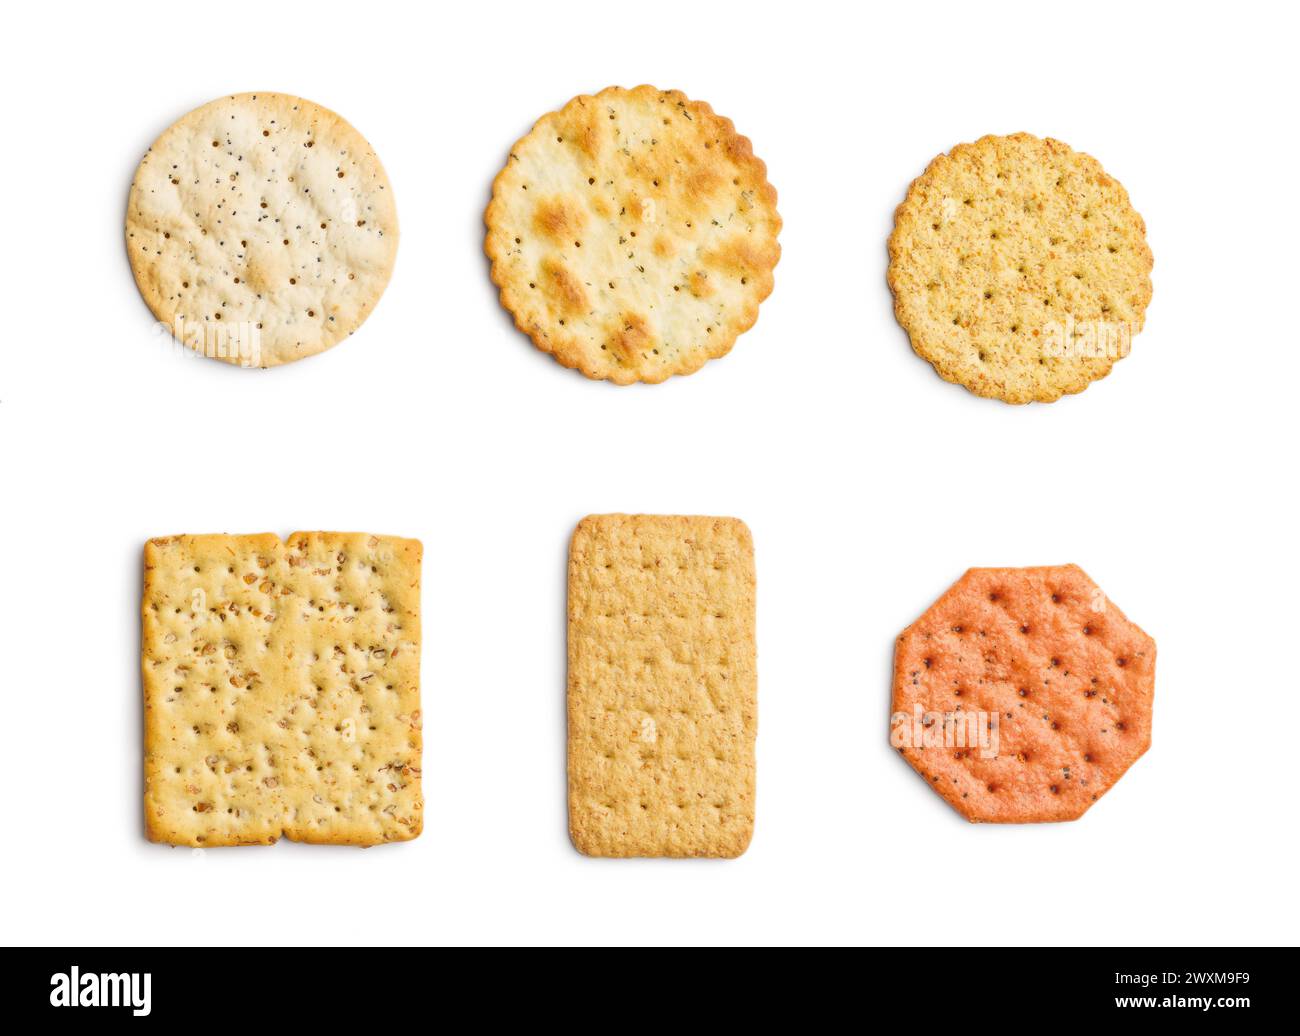 A selection of various crackers neatly placed in a straight line on the white background. Stock Photo